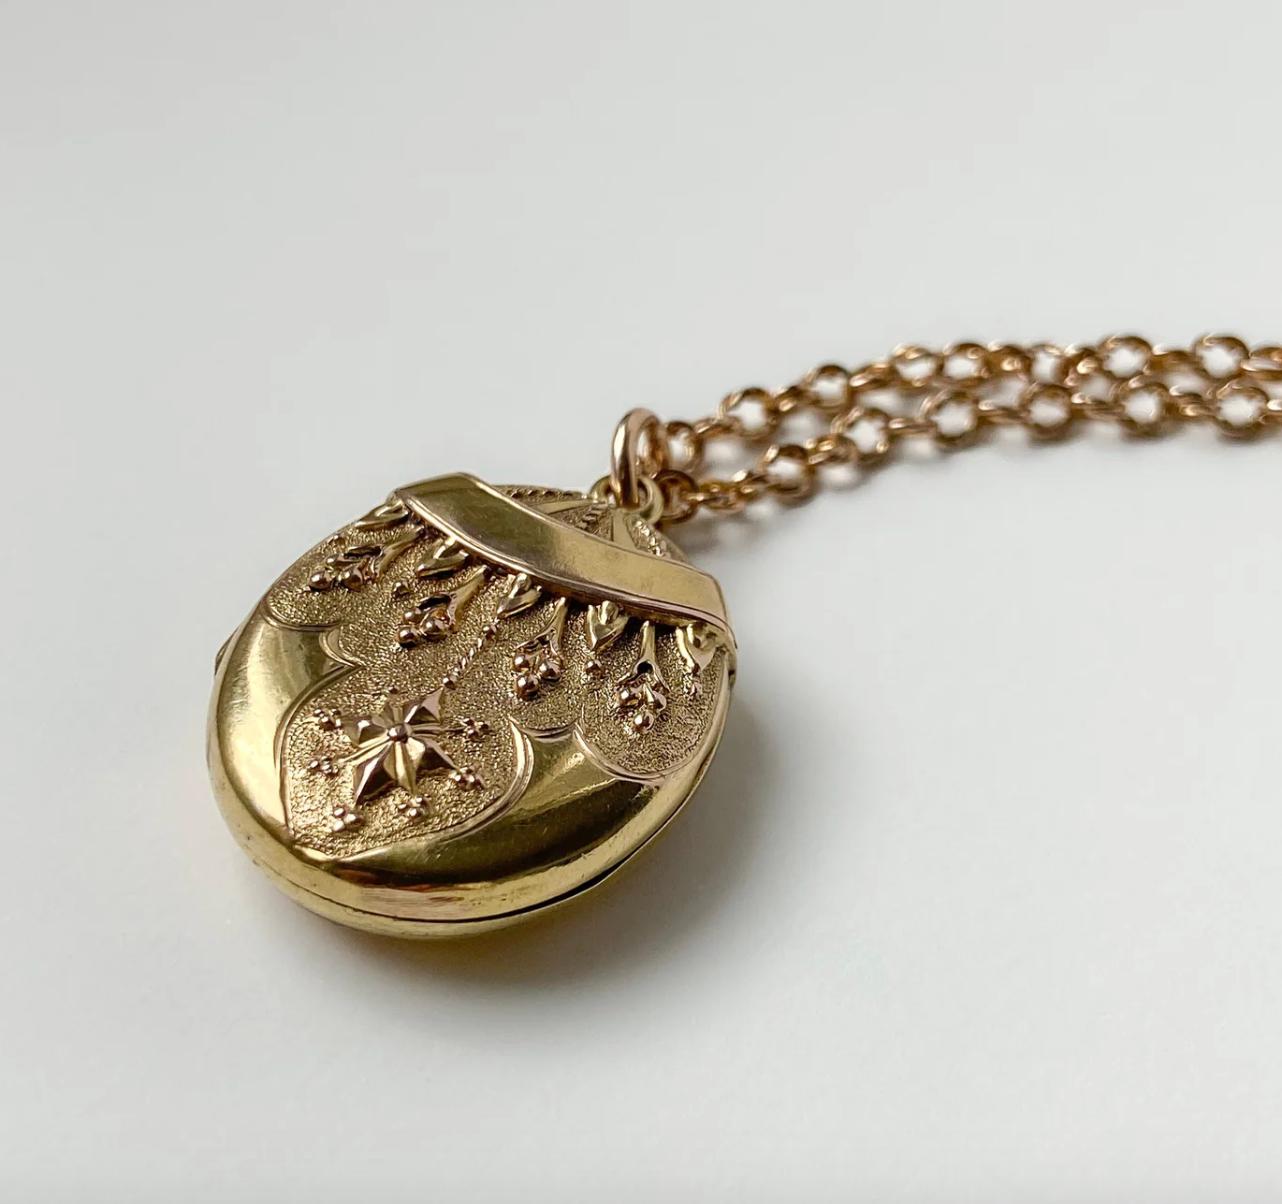 Antique 9ct Gold Large Heavy Relief Engraved Locket, a truly rare collectors piece! The Locket is oval in shape, dating back to c1890-1900. 

Available as a locket only, or with 15